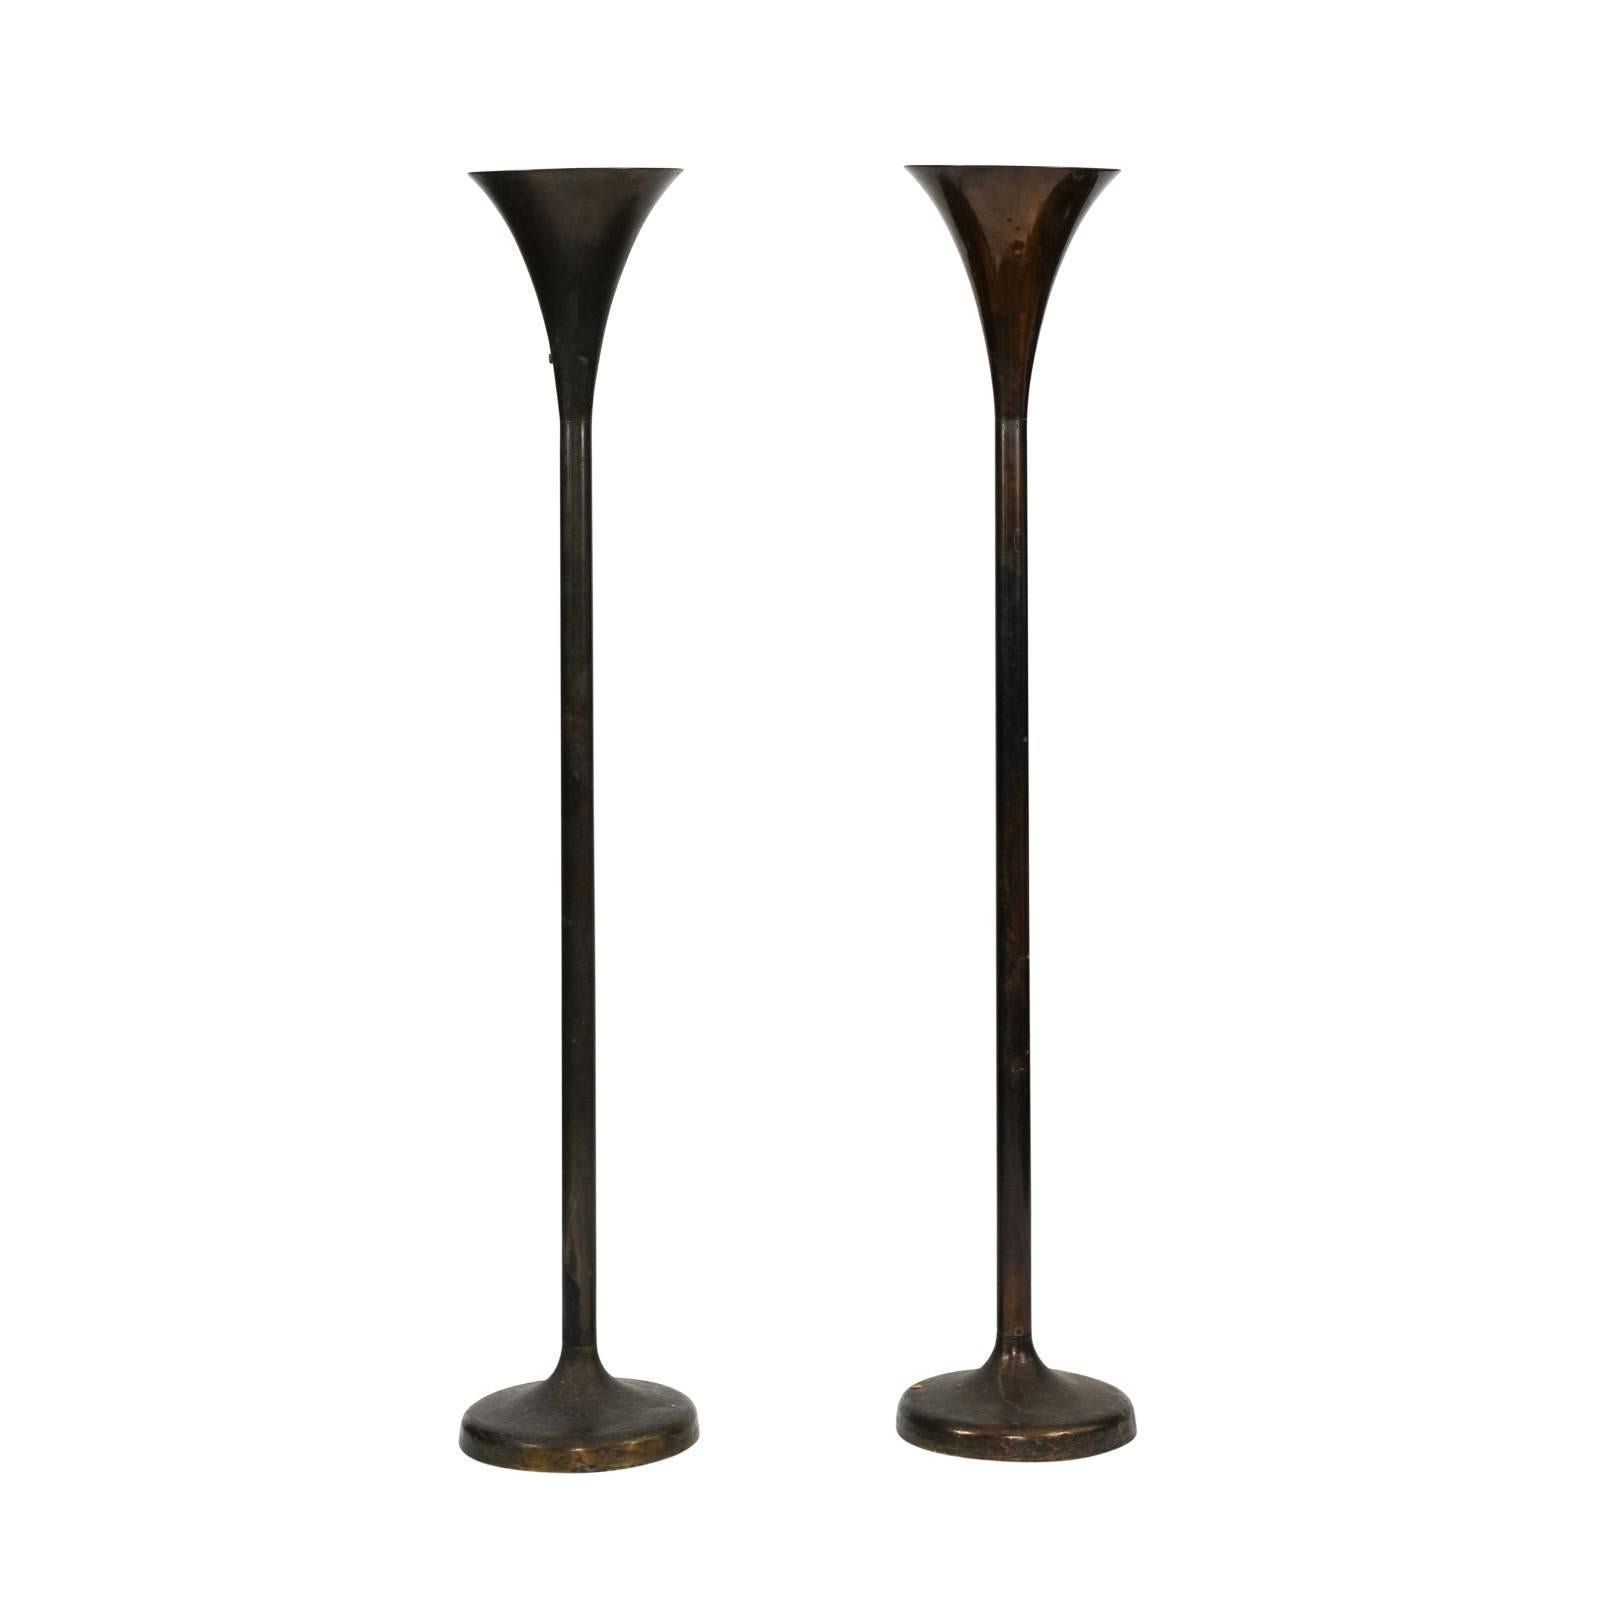 Pair of French Black Metal Torchères Floor Lamps from the 1950s